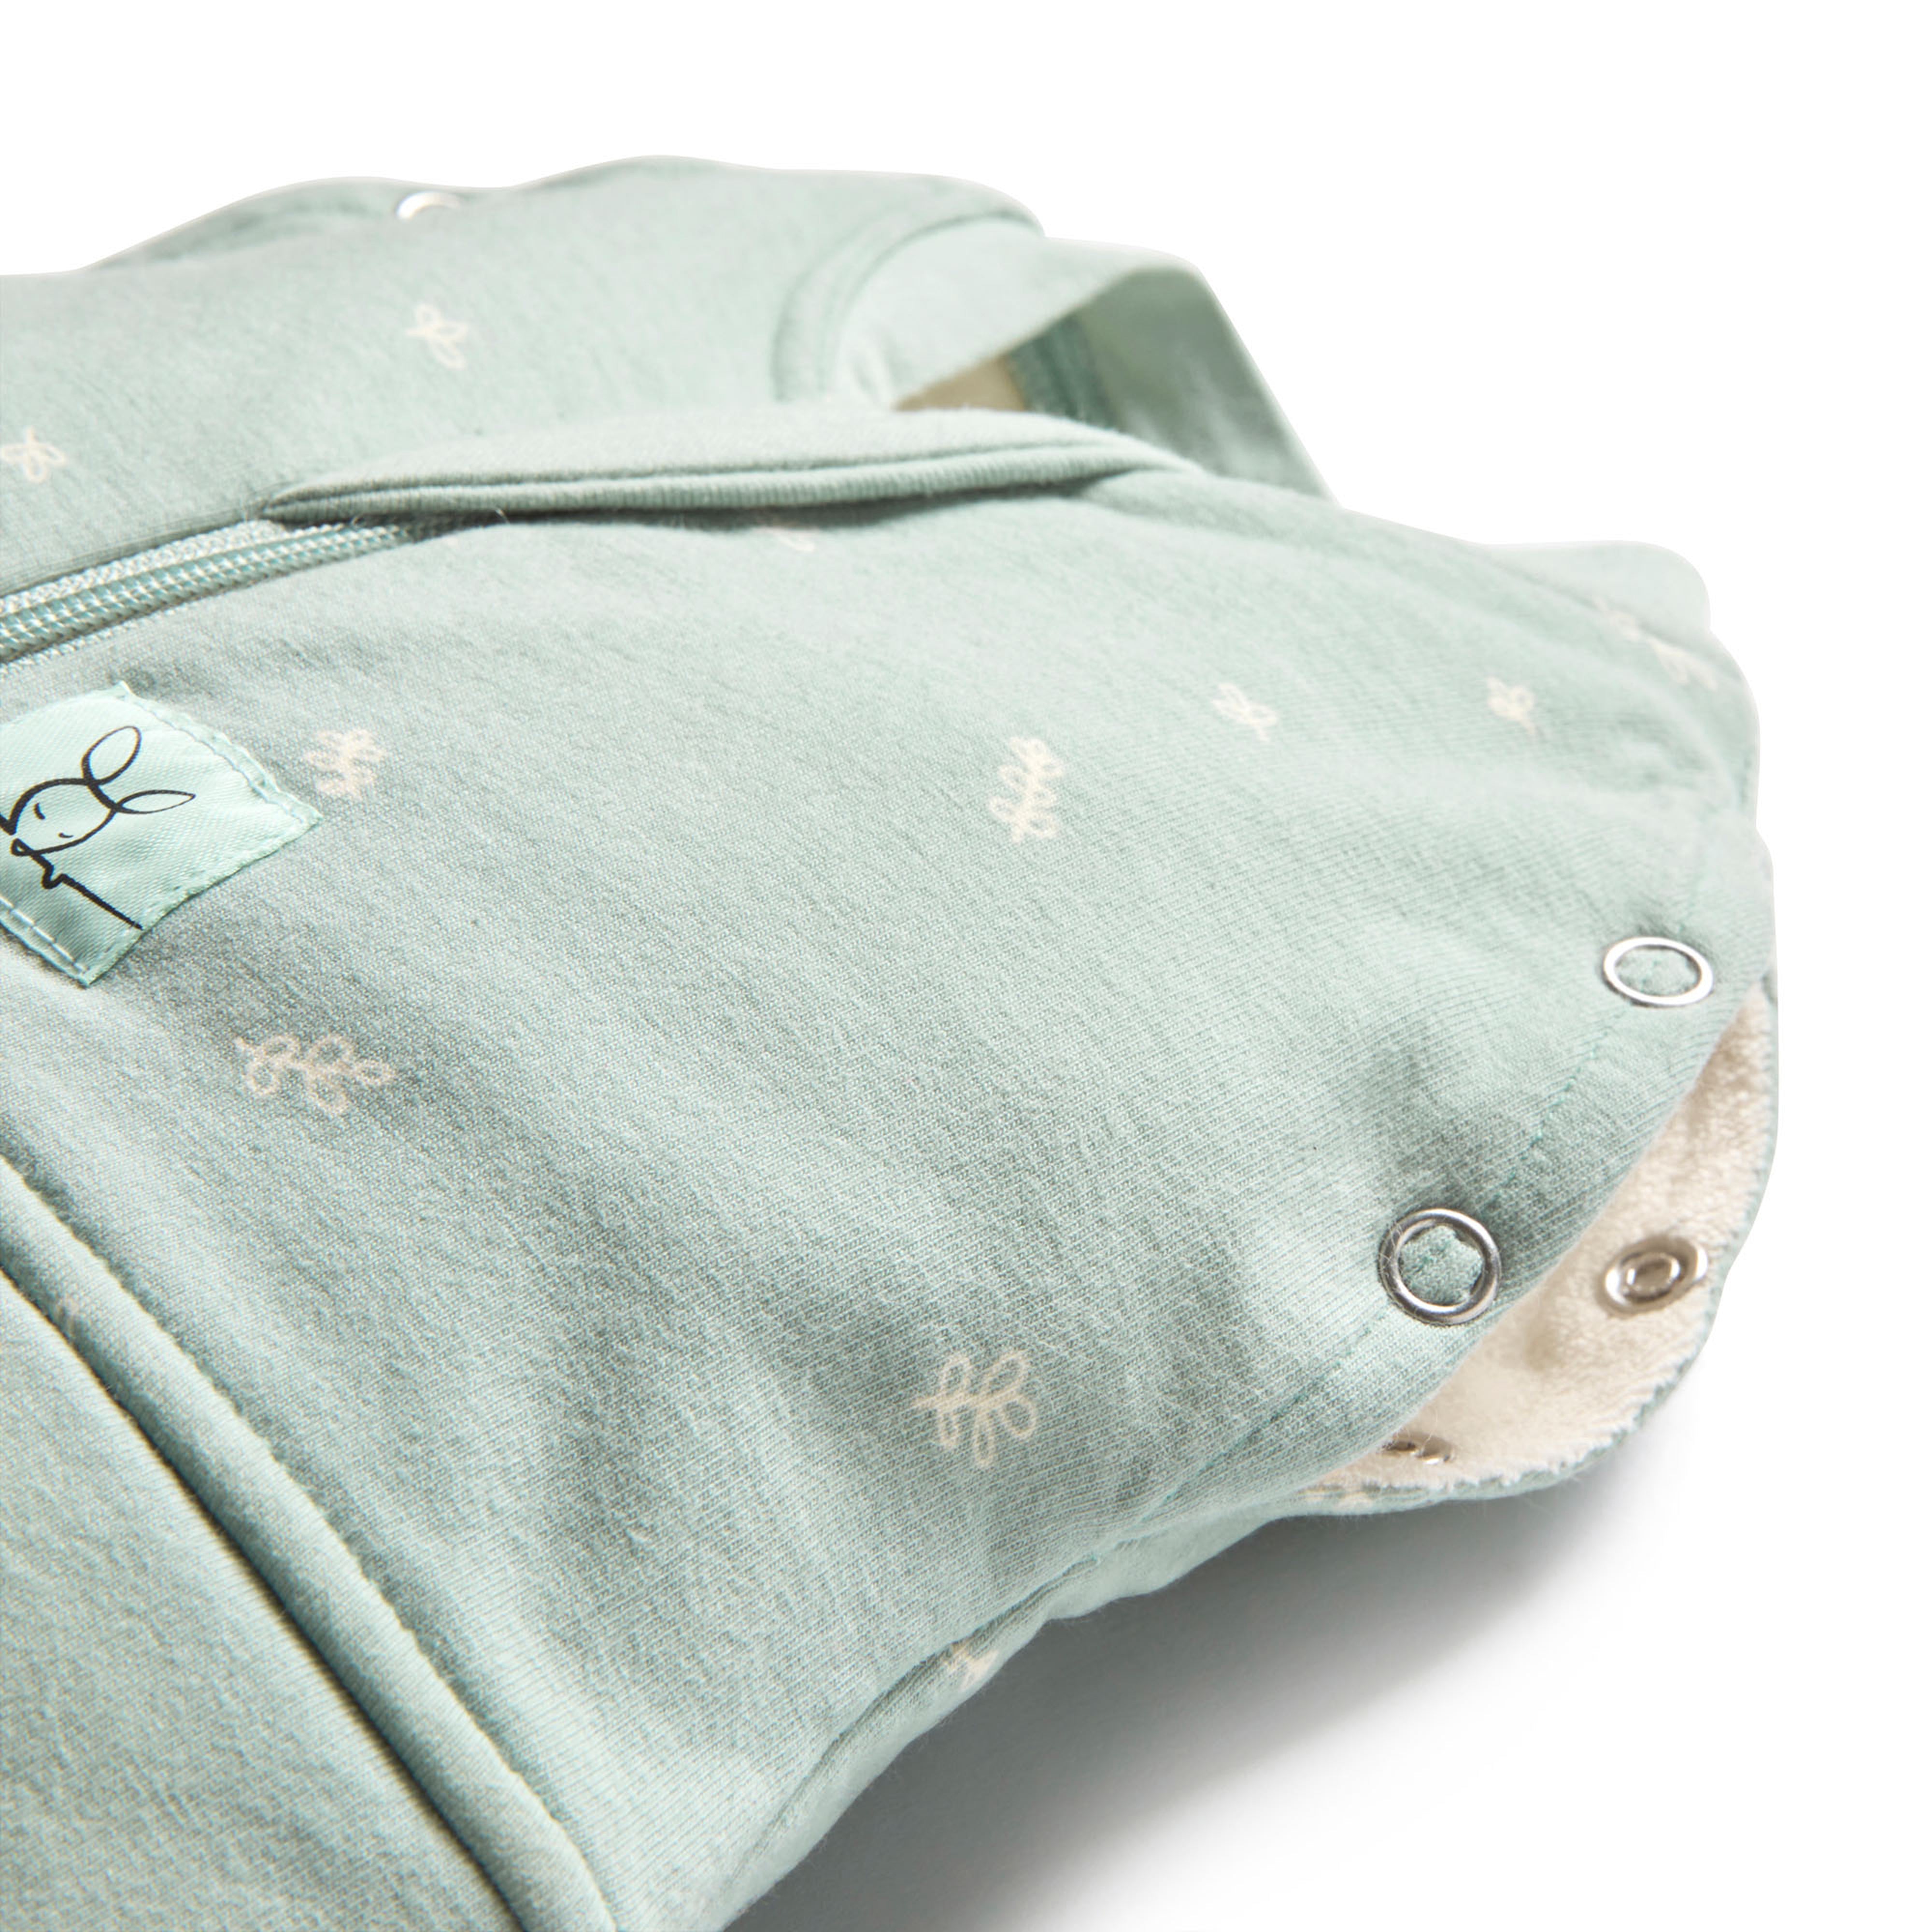 ergopouch-cocoon-swaddle-bag-2-5-tog-night-sky-ergo-zepco-2-5t00-03mns20- (4)